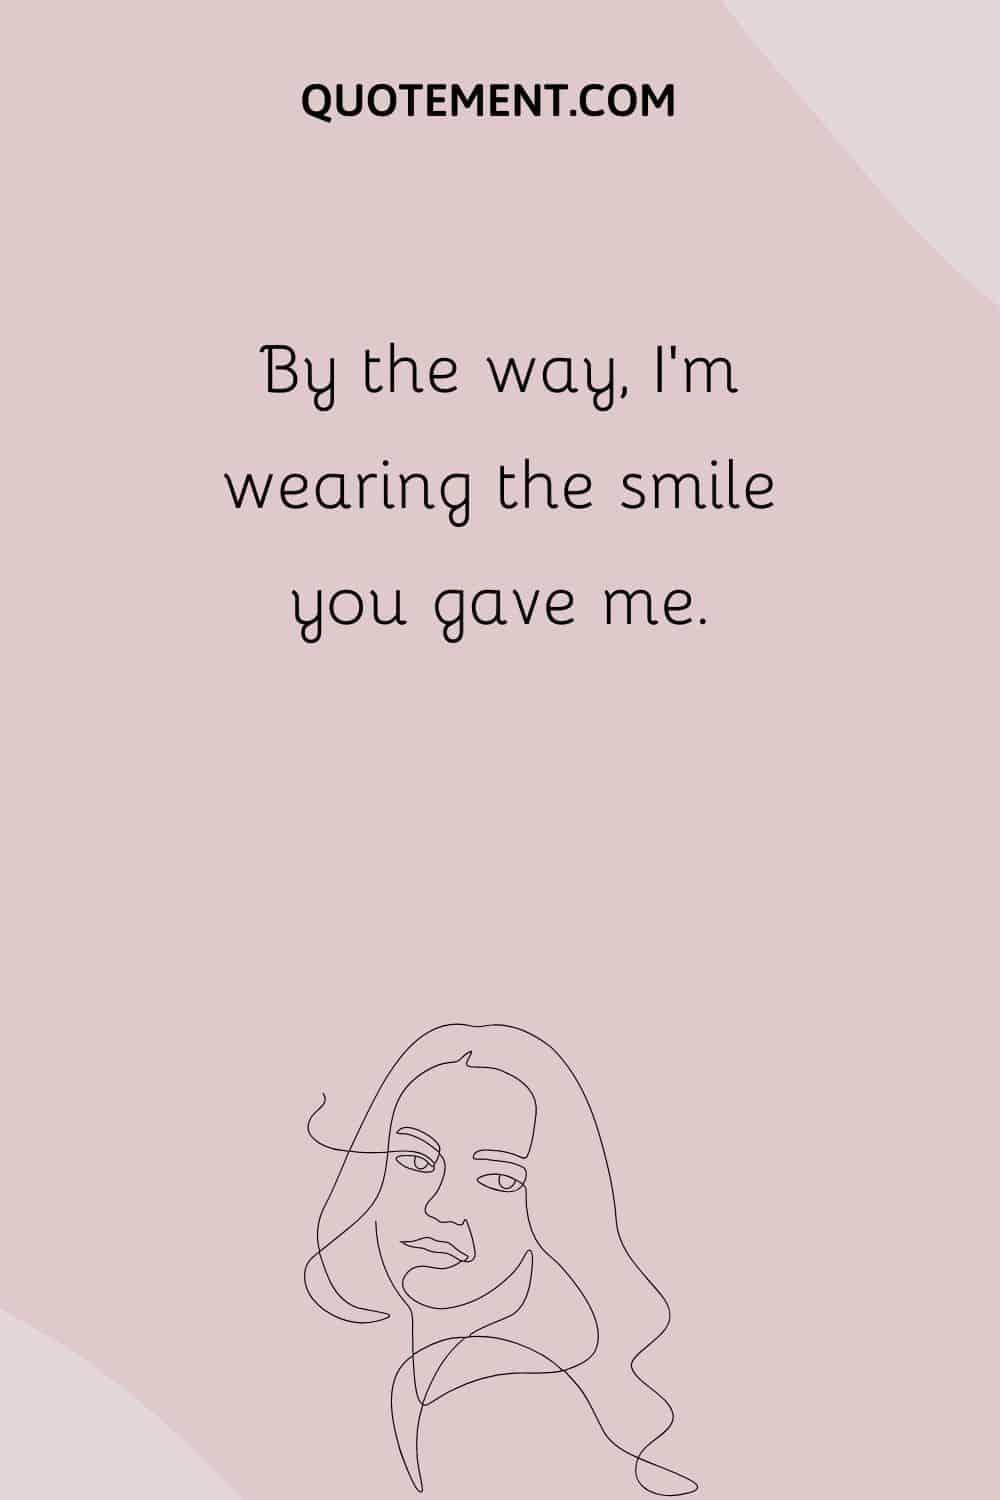 By the way, I’m wearing the smile you gave me.